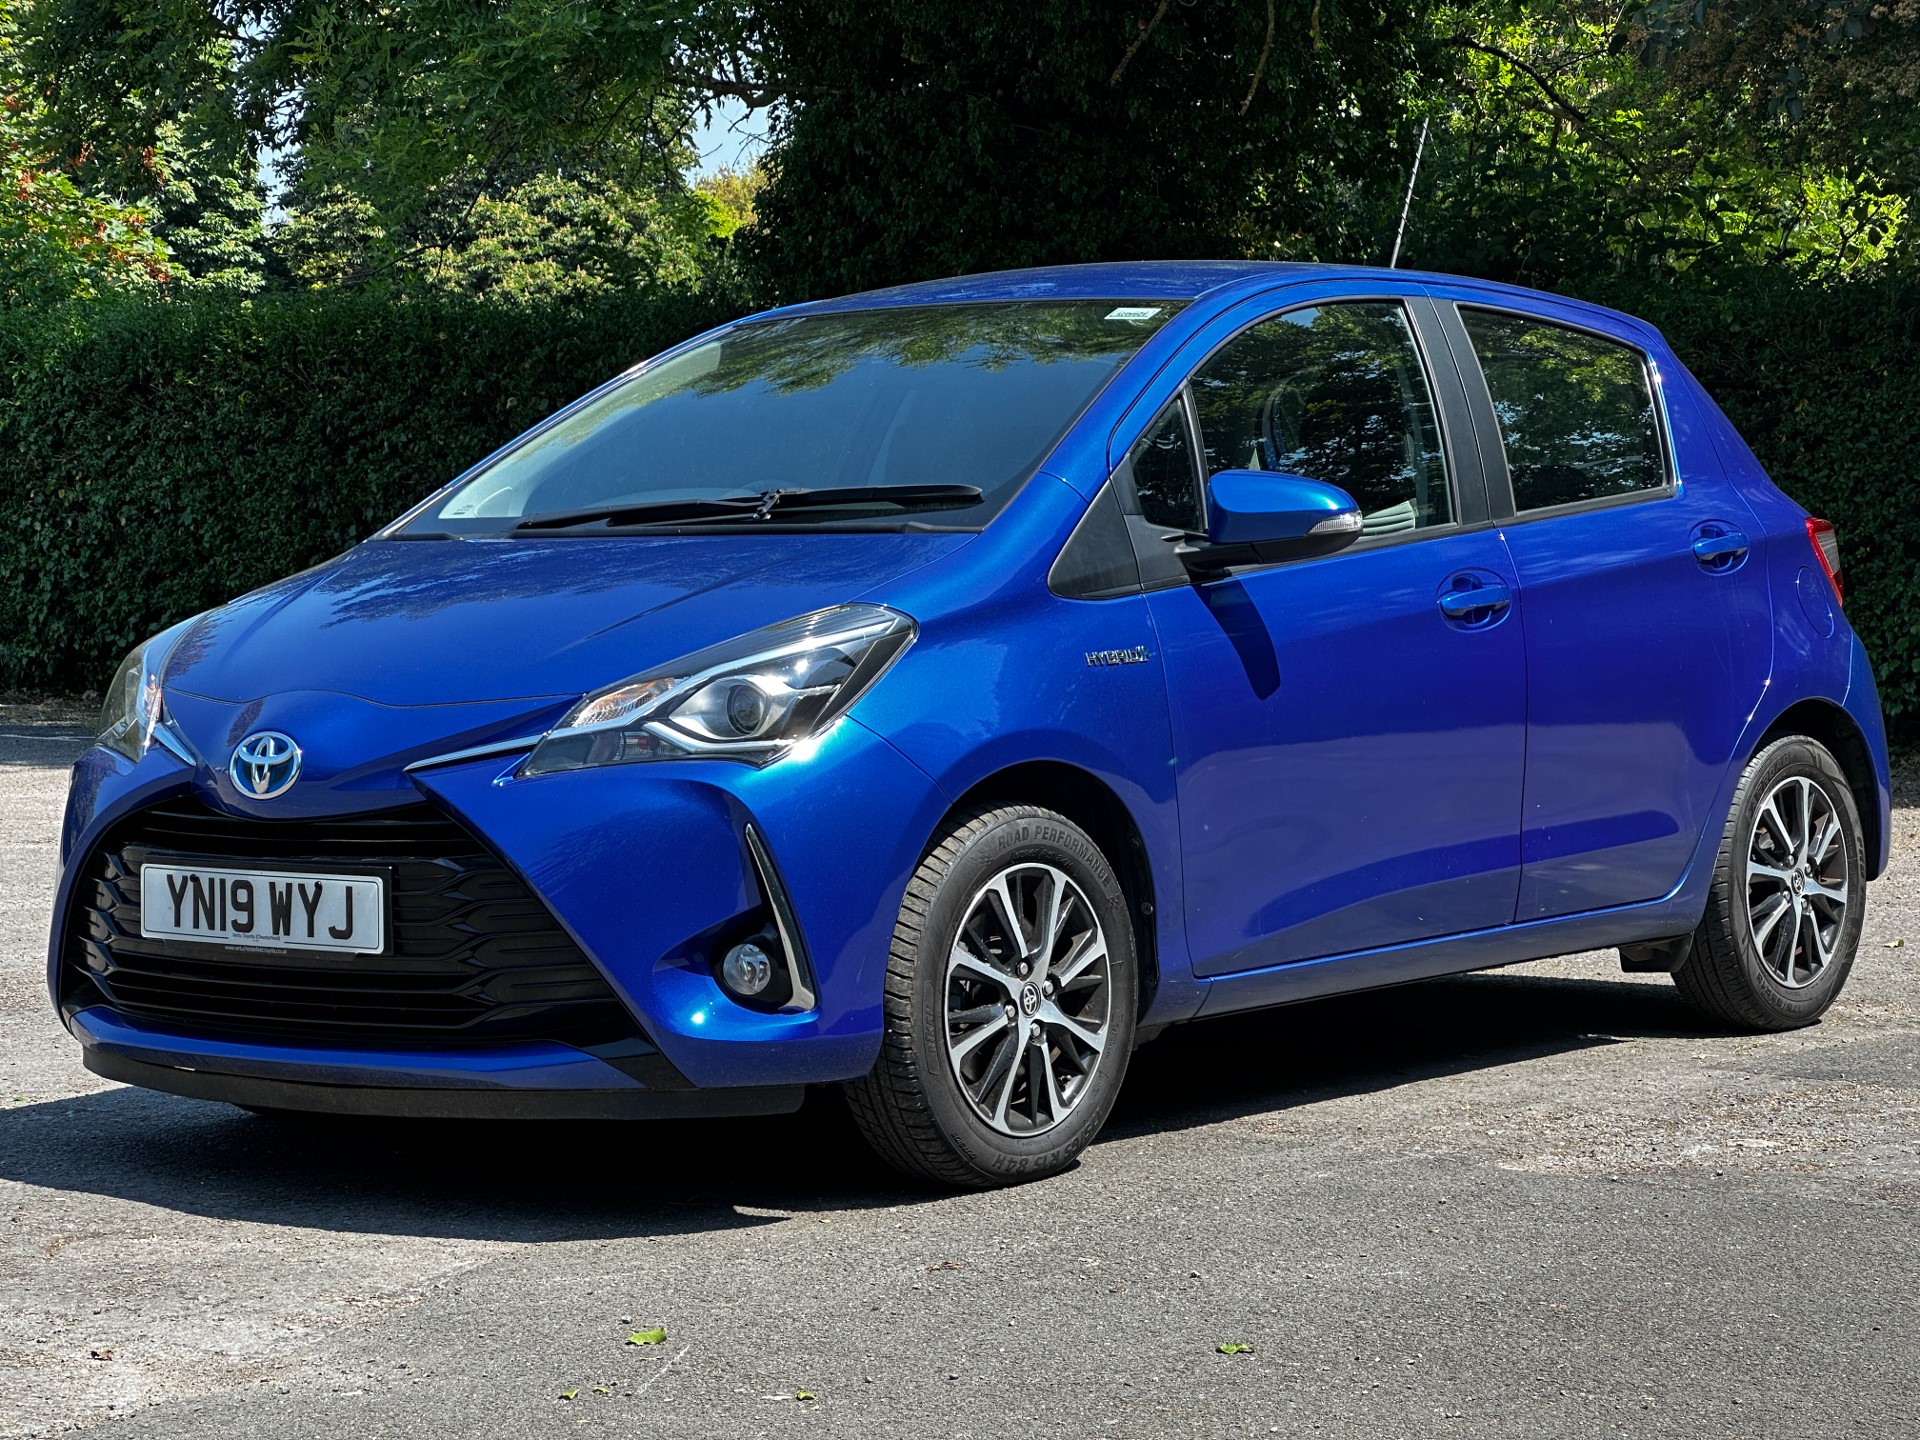 Used Toyota Yaris for sale in East Molesey, Surrey Mach One Cars